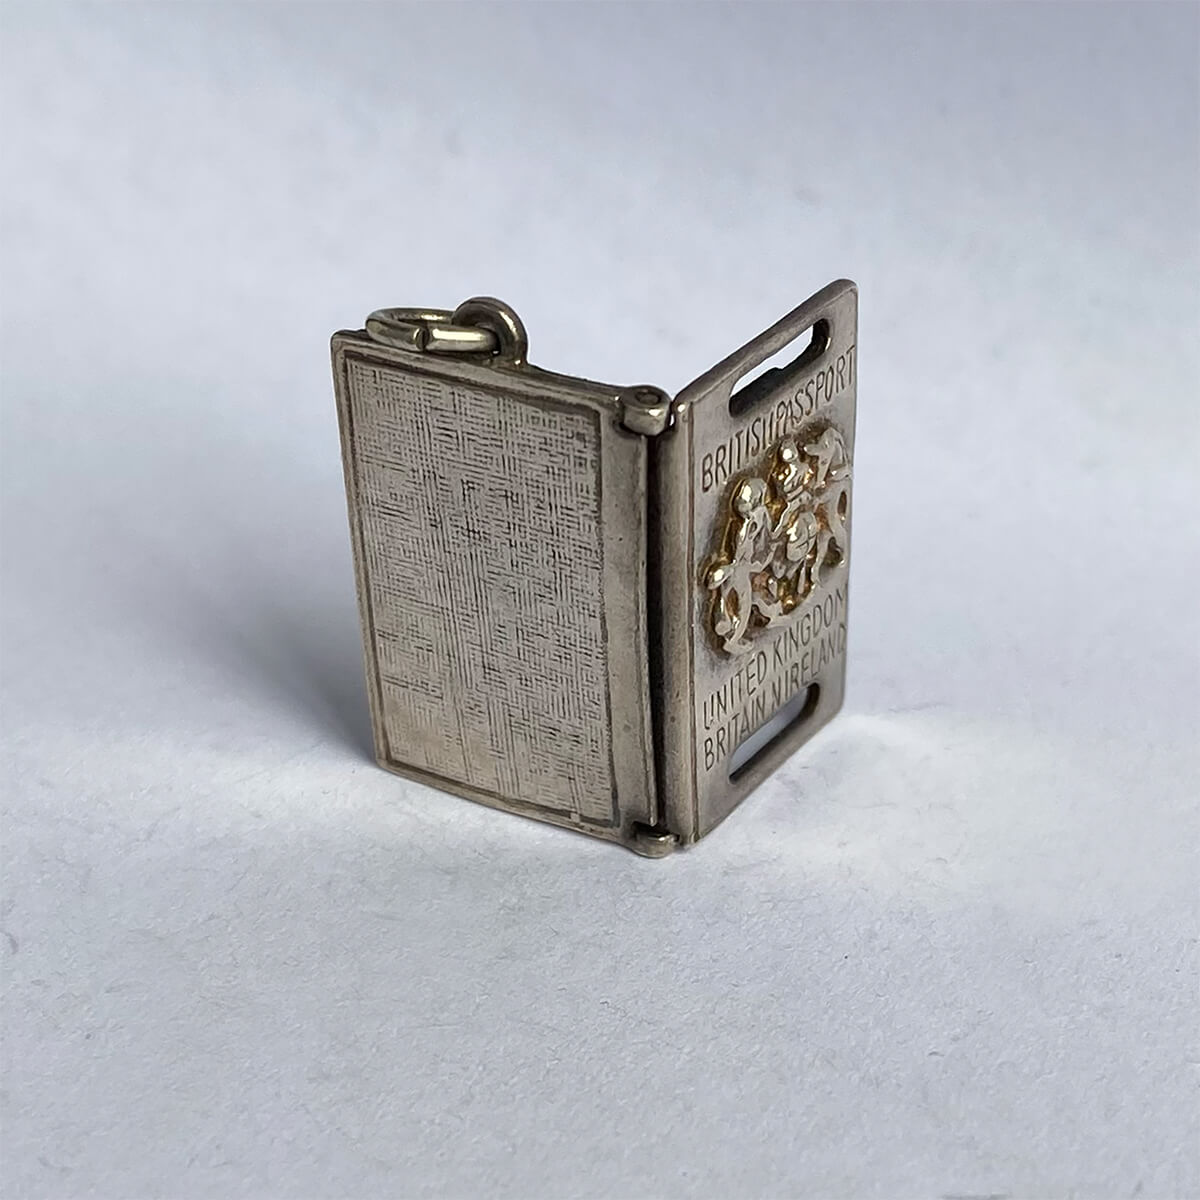 1970s silver British Passport charm opens to paper